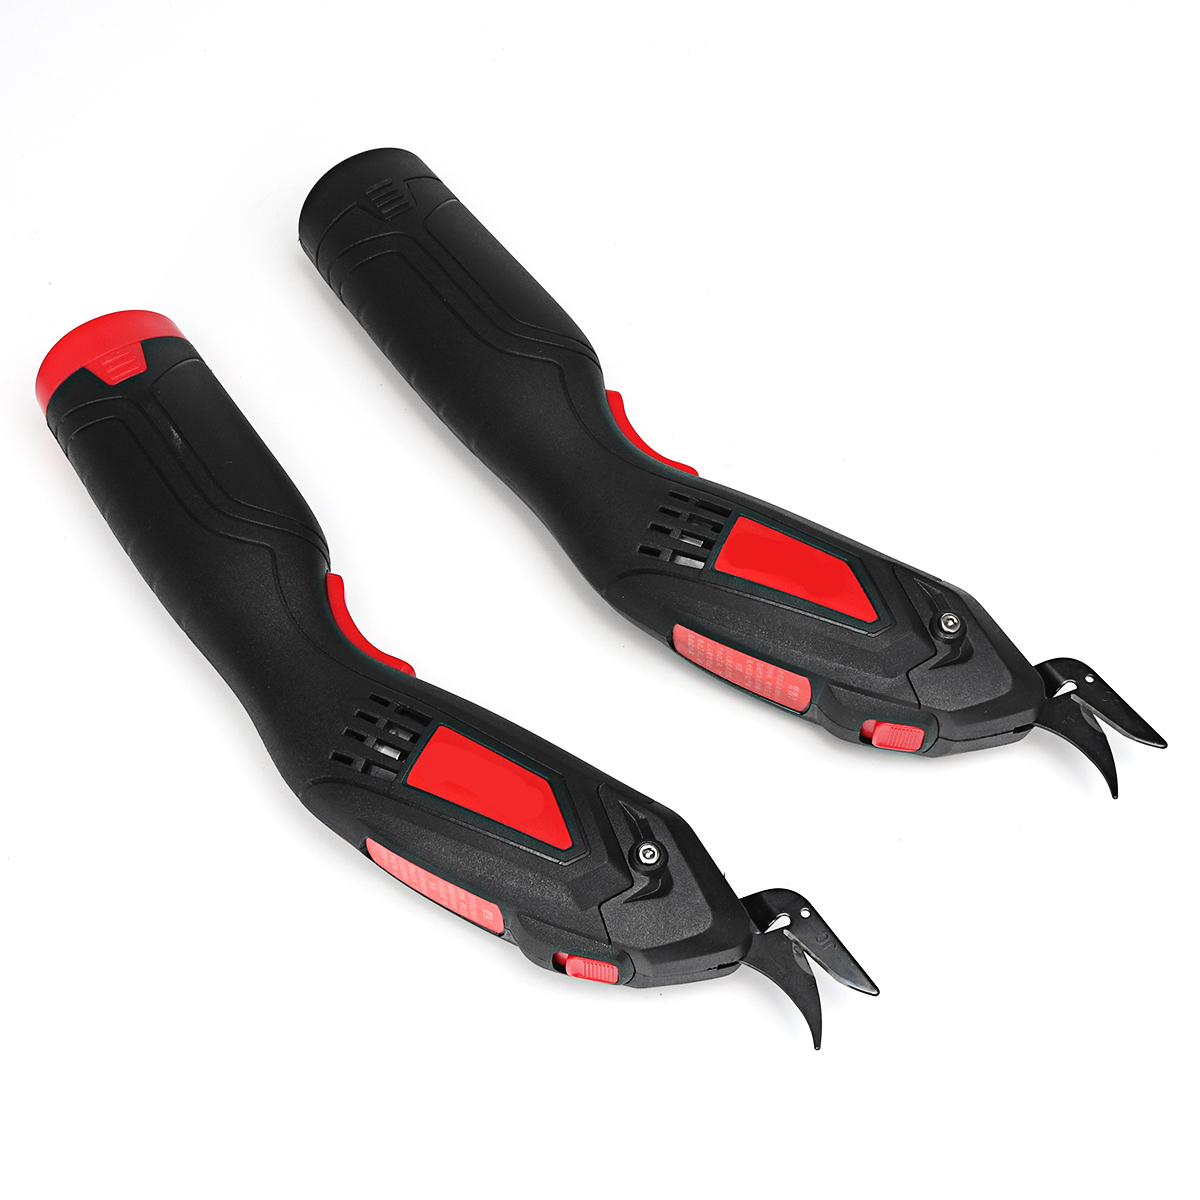 WiredCordless-Potable-Electric-Scissors-Leather-Fabric-Crafts-Cutting-Blade-Trimmer-1716218-8